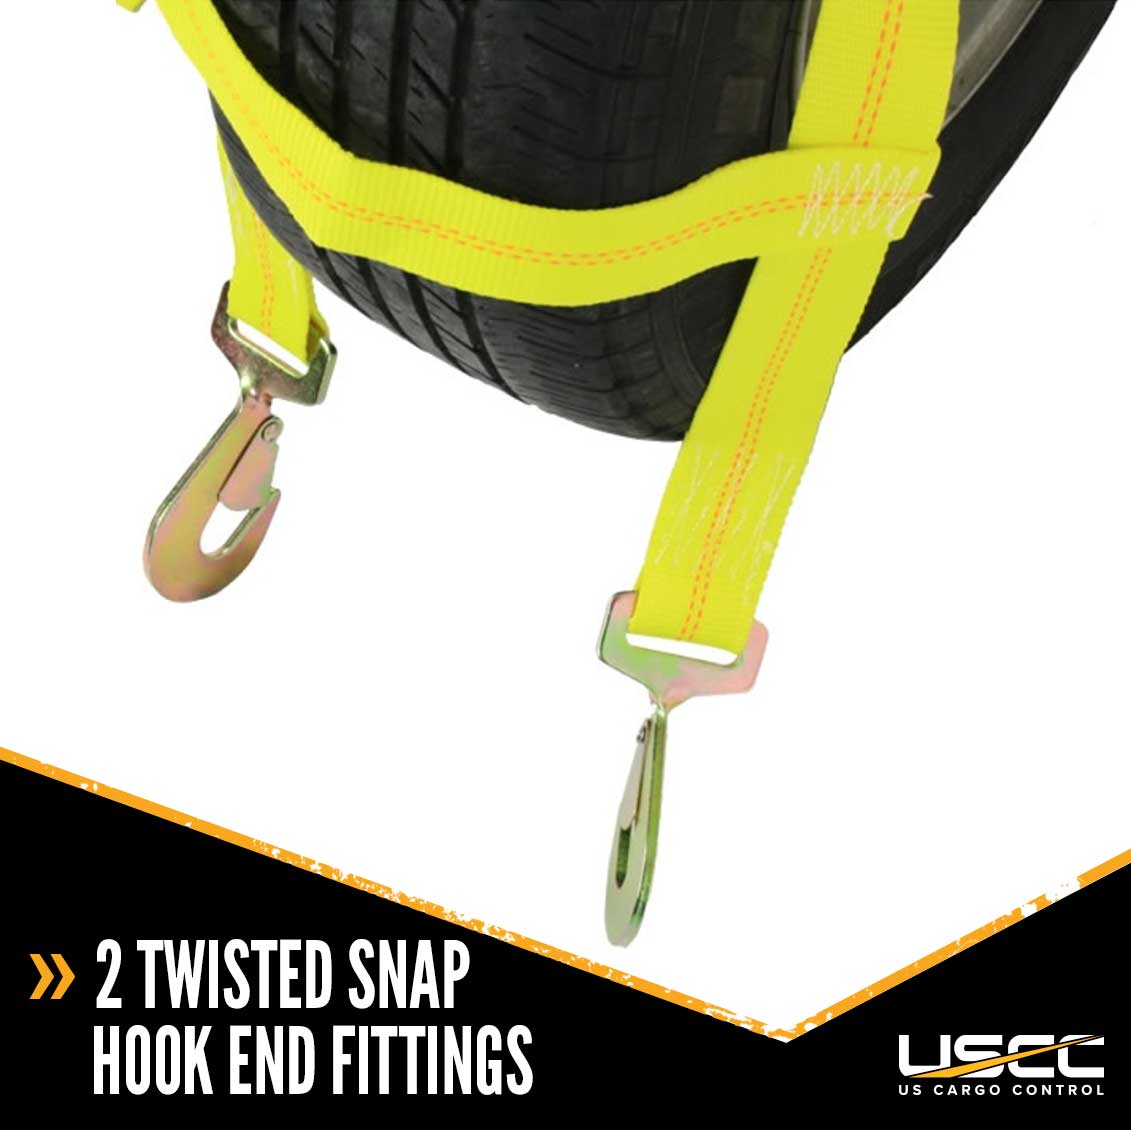 Tow Dolly Basket Strap with Twisted Snap Hooks 2 Pack image 10 of 10